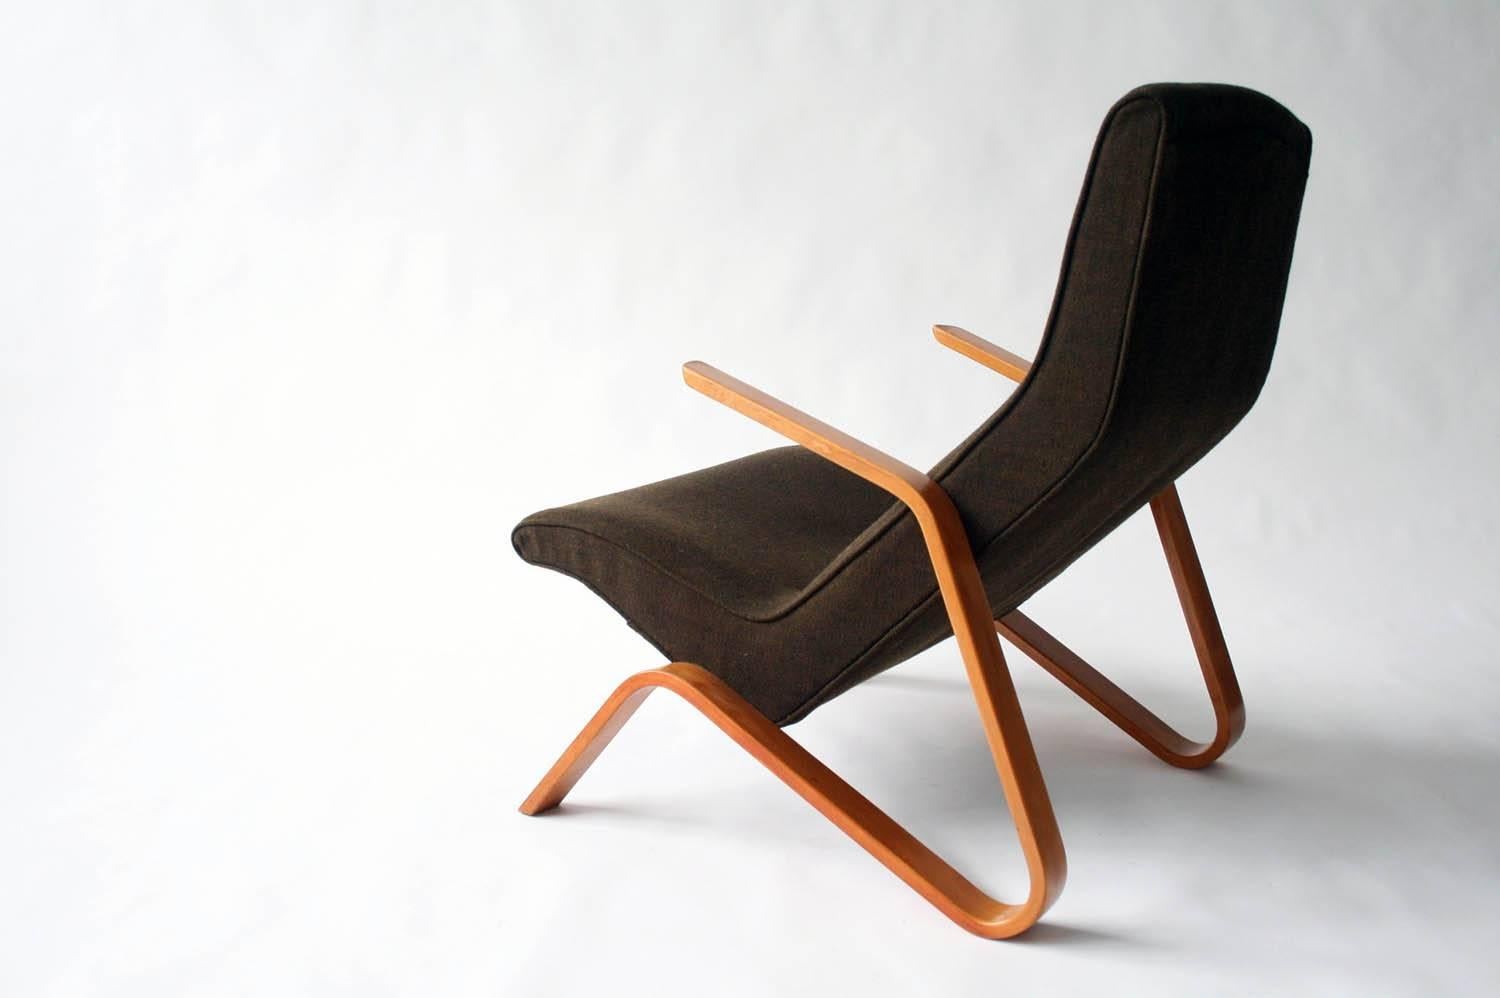 Laminated Vintage Grasshopper Lounge Chair by Eero Saarinen for Knoll